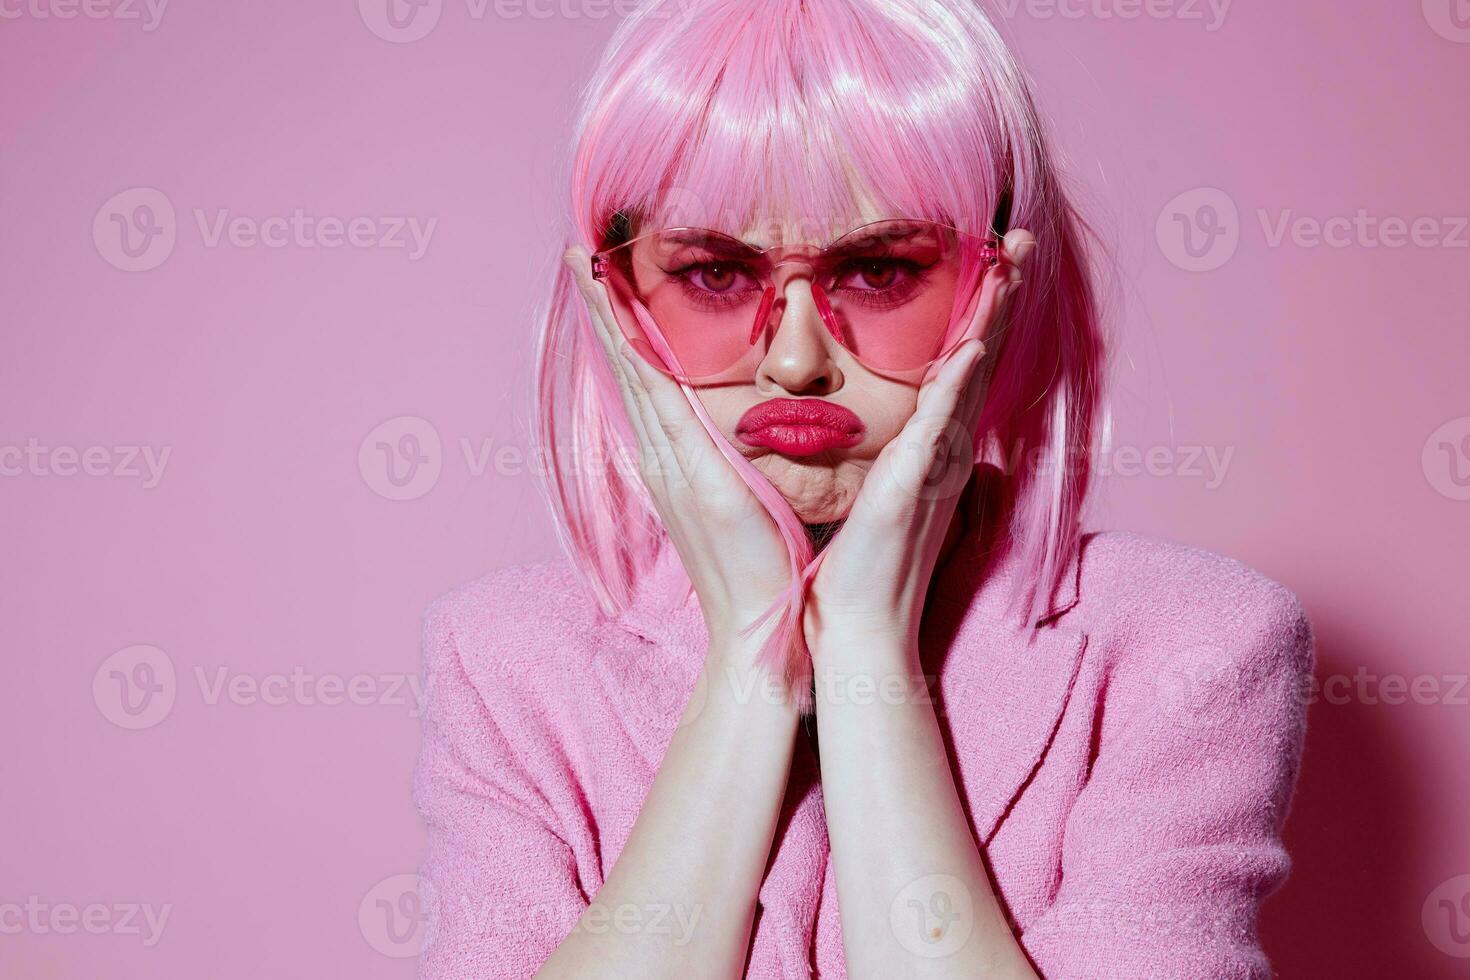 Beautiful fashionable girl bright makeup pink hair glamor stylish glasses color background unaltered photo